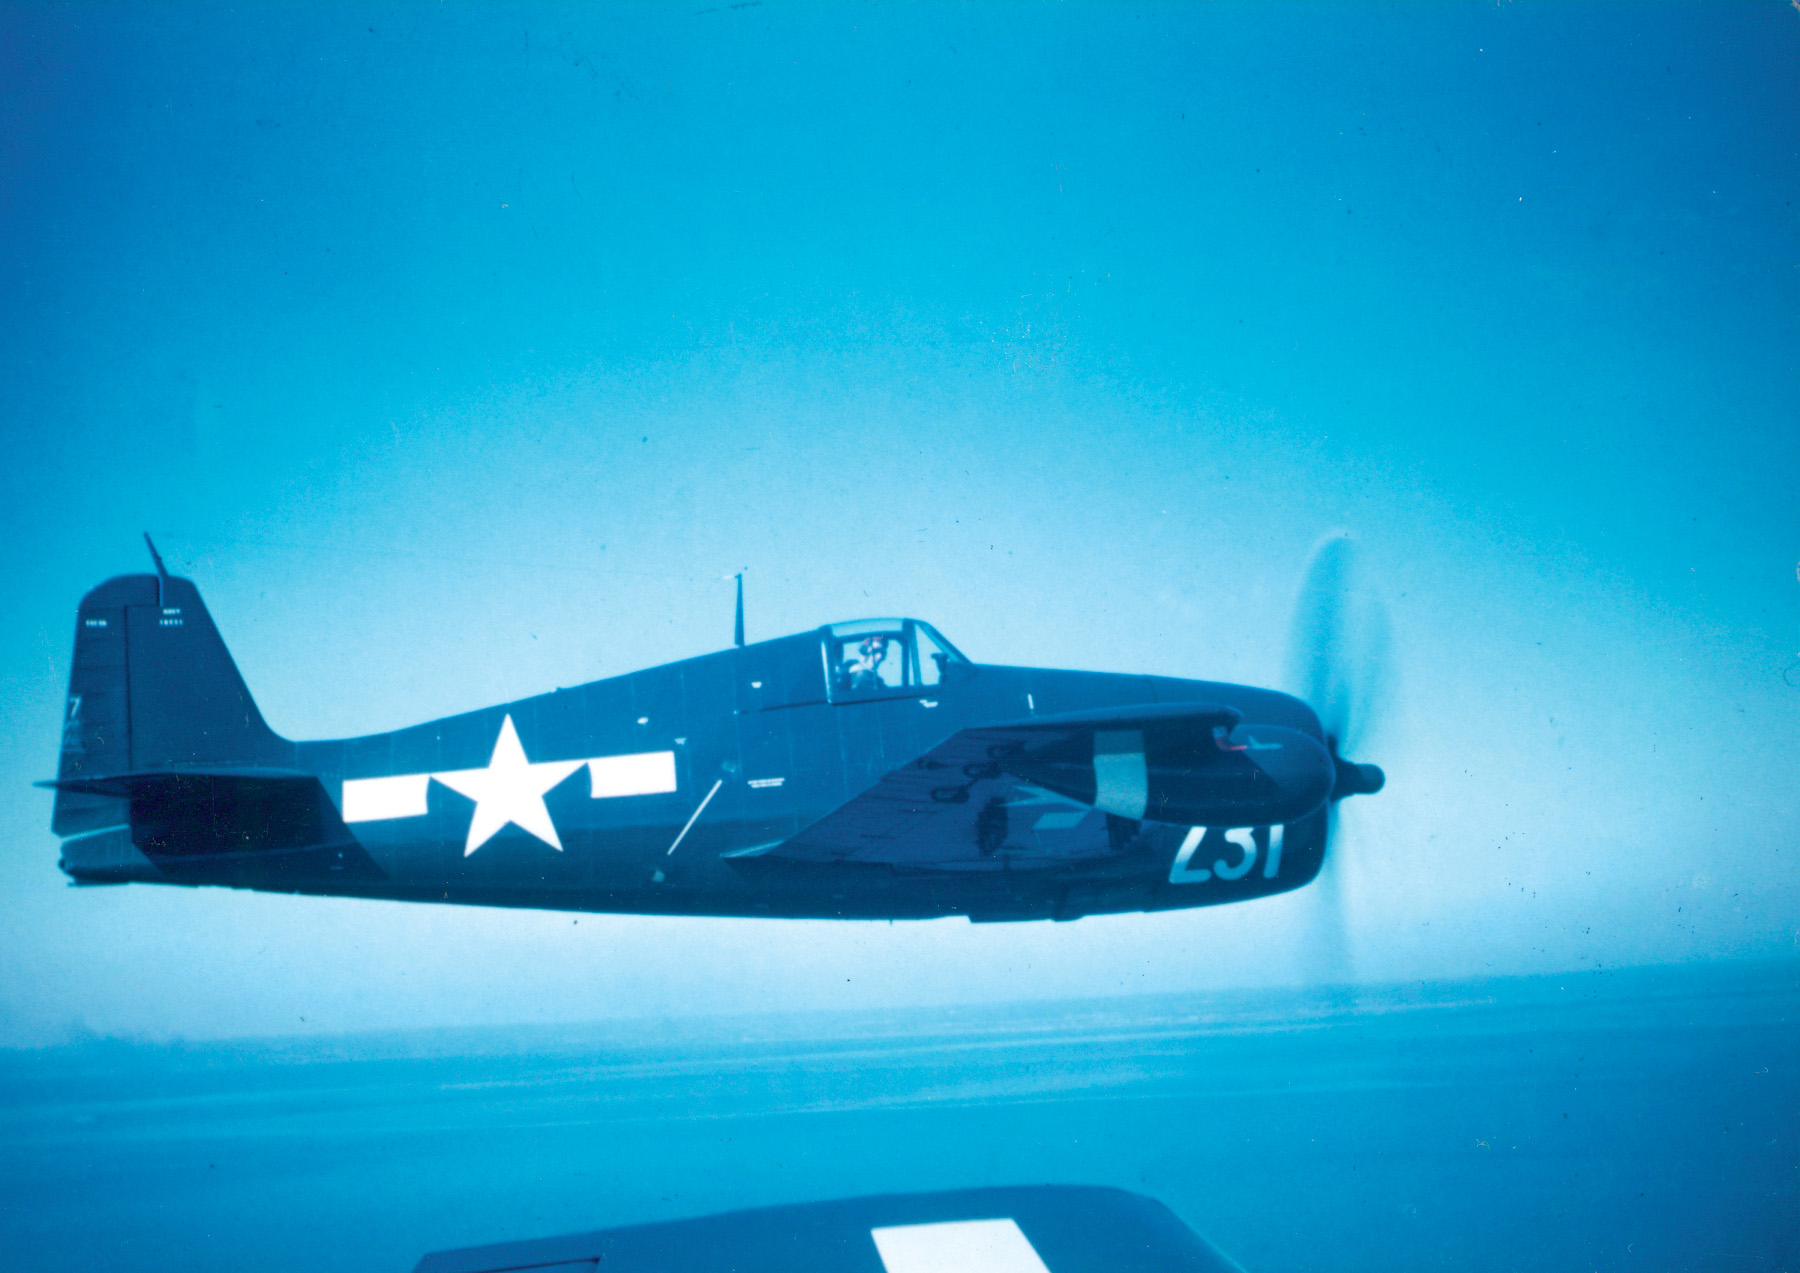 The F6F Hellcat was heavier than the Zero and could match it in most categories. Its .50-caliber machine guns could shred the Zero’s light armor in combat.